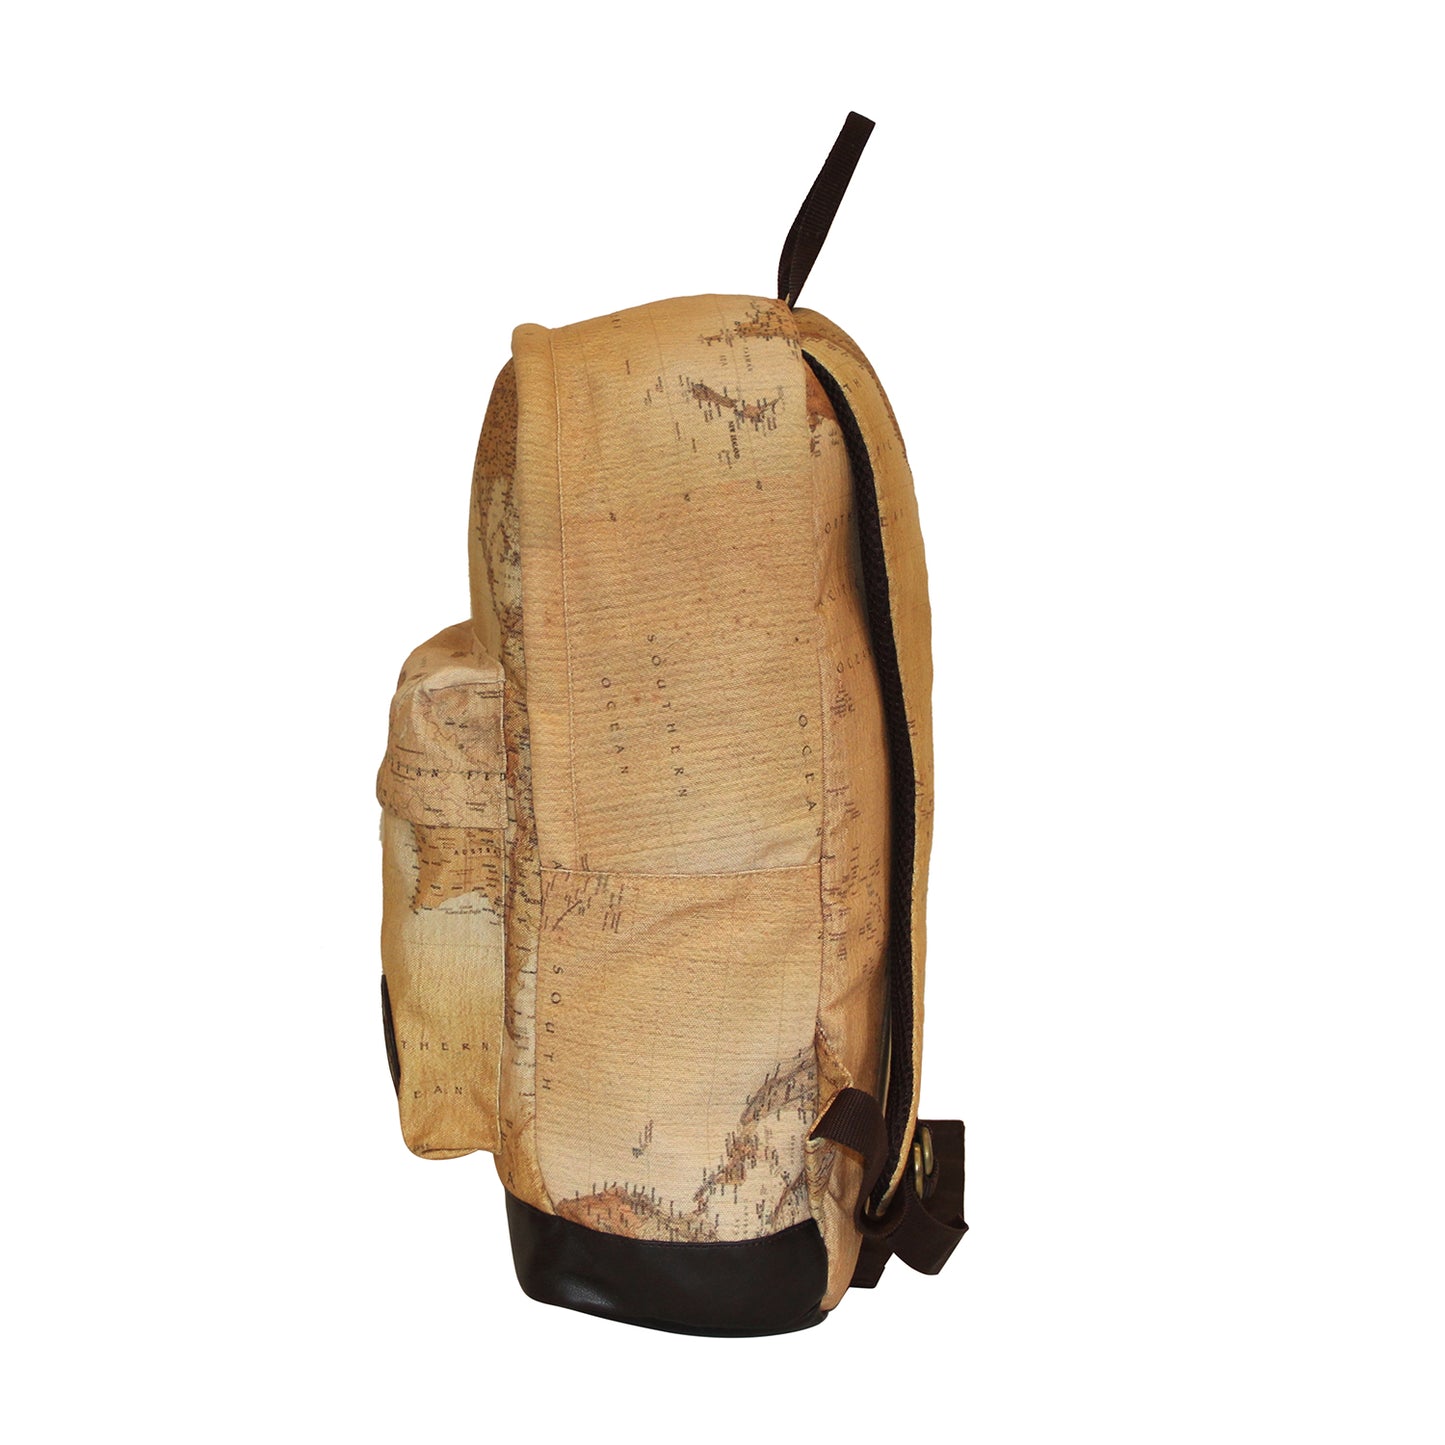 Beige Canvas Backpack